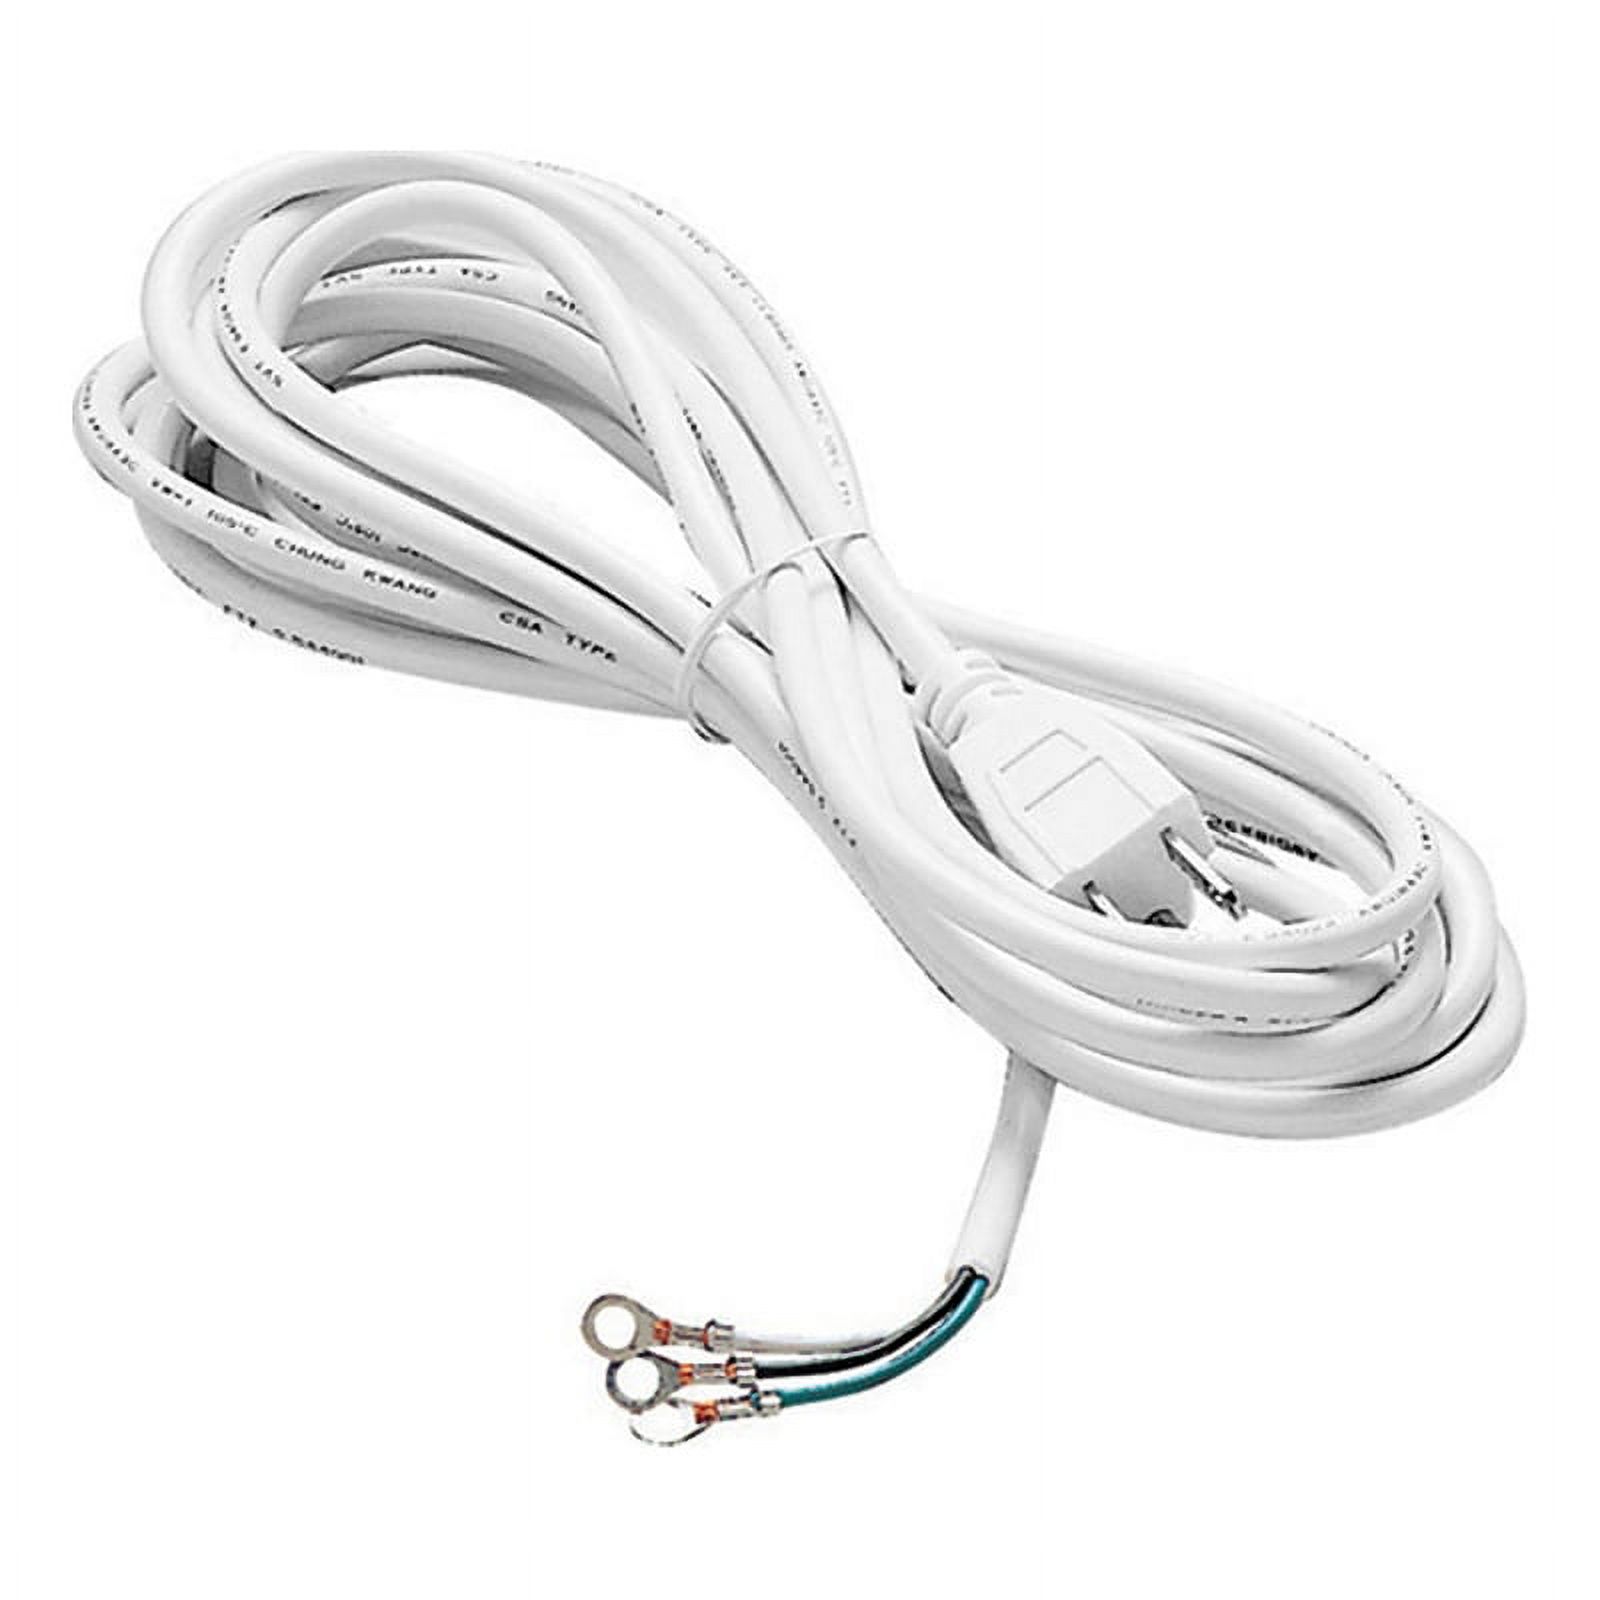 WAC Lighting H Track 3-Wire Plastic Power Cord with Ground in White - image 2 of 2